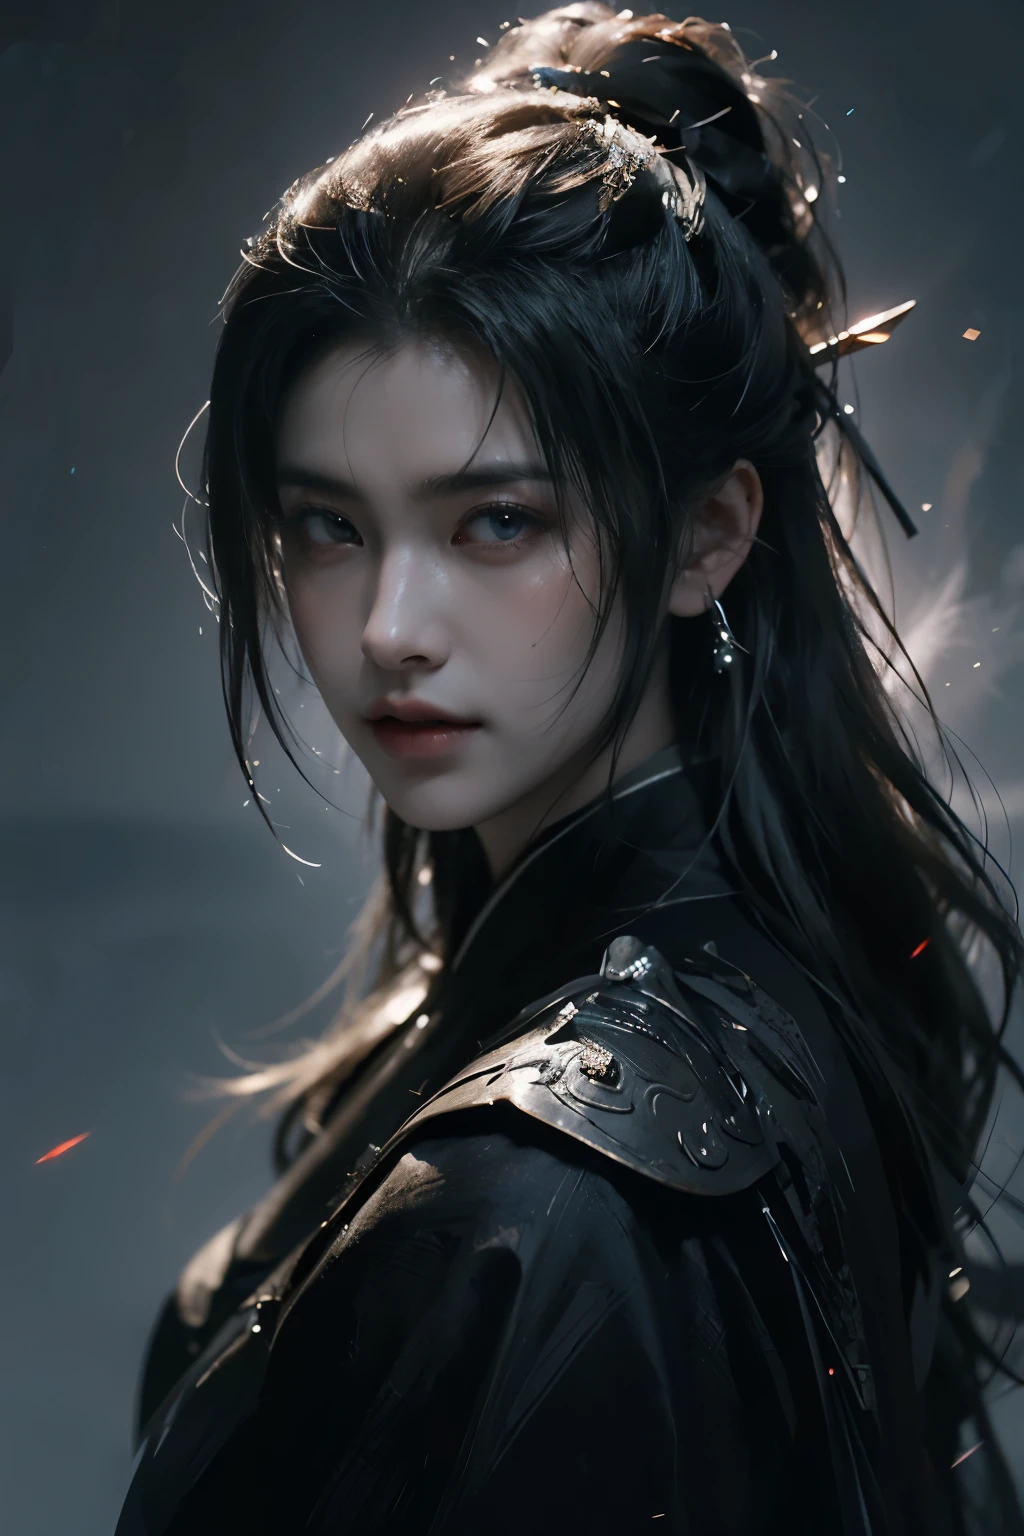 Game art，The best picture quality，Highest resolution，8K，(A bust photograph)，(Portrait from bust:1.5)，(Head close-up)，(Rule of thirds)，Unreal Engine 5 rendering works， (The Girl of the Future)，(Female Warrior)， 
20-year-old girl，(The warrior in ancient China)，An eye rich in detail，(Big breasts)，Elegant and noble，indifferent，(Brave)，
(The costume of Chinese swordsman elements，Costumes of ancient Chinese characters，A random pattern of clothing，Ribbon，Joint Armor，Rich dress details，)Chinese Characters，Fantasy style，
Photo poses，Field background，Movie lights，Ray tracing，Game CG，((3D Unreal Engine))，oc rendering reflection pattern